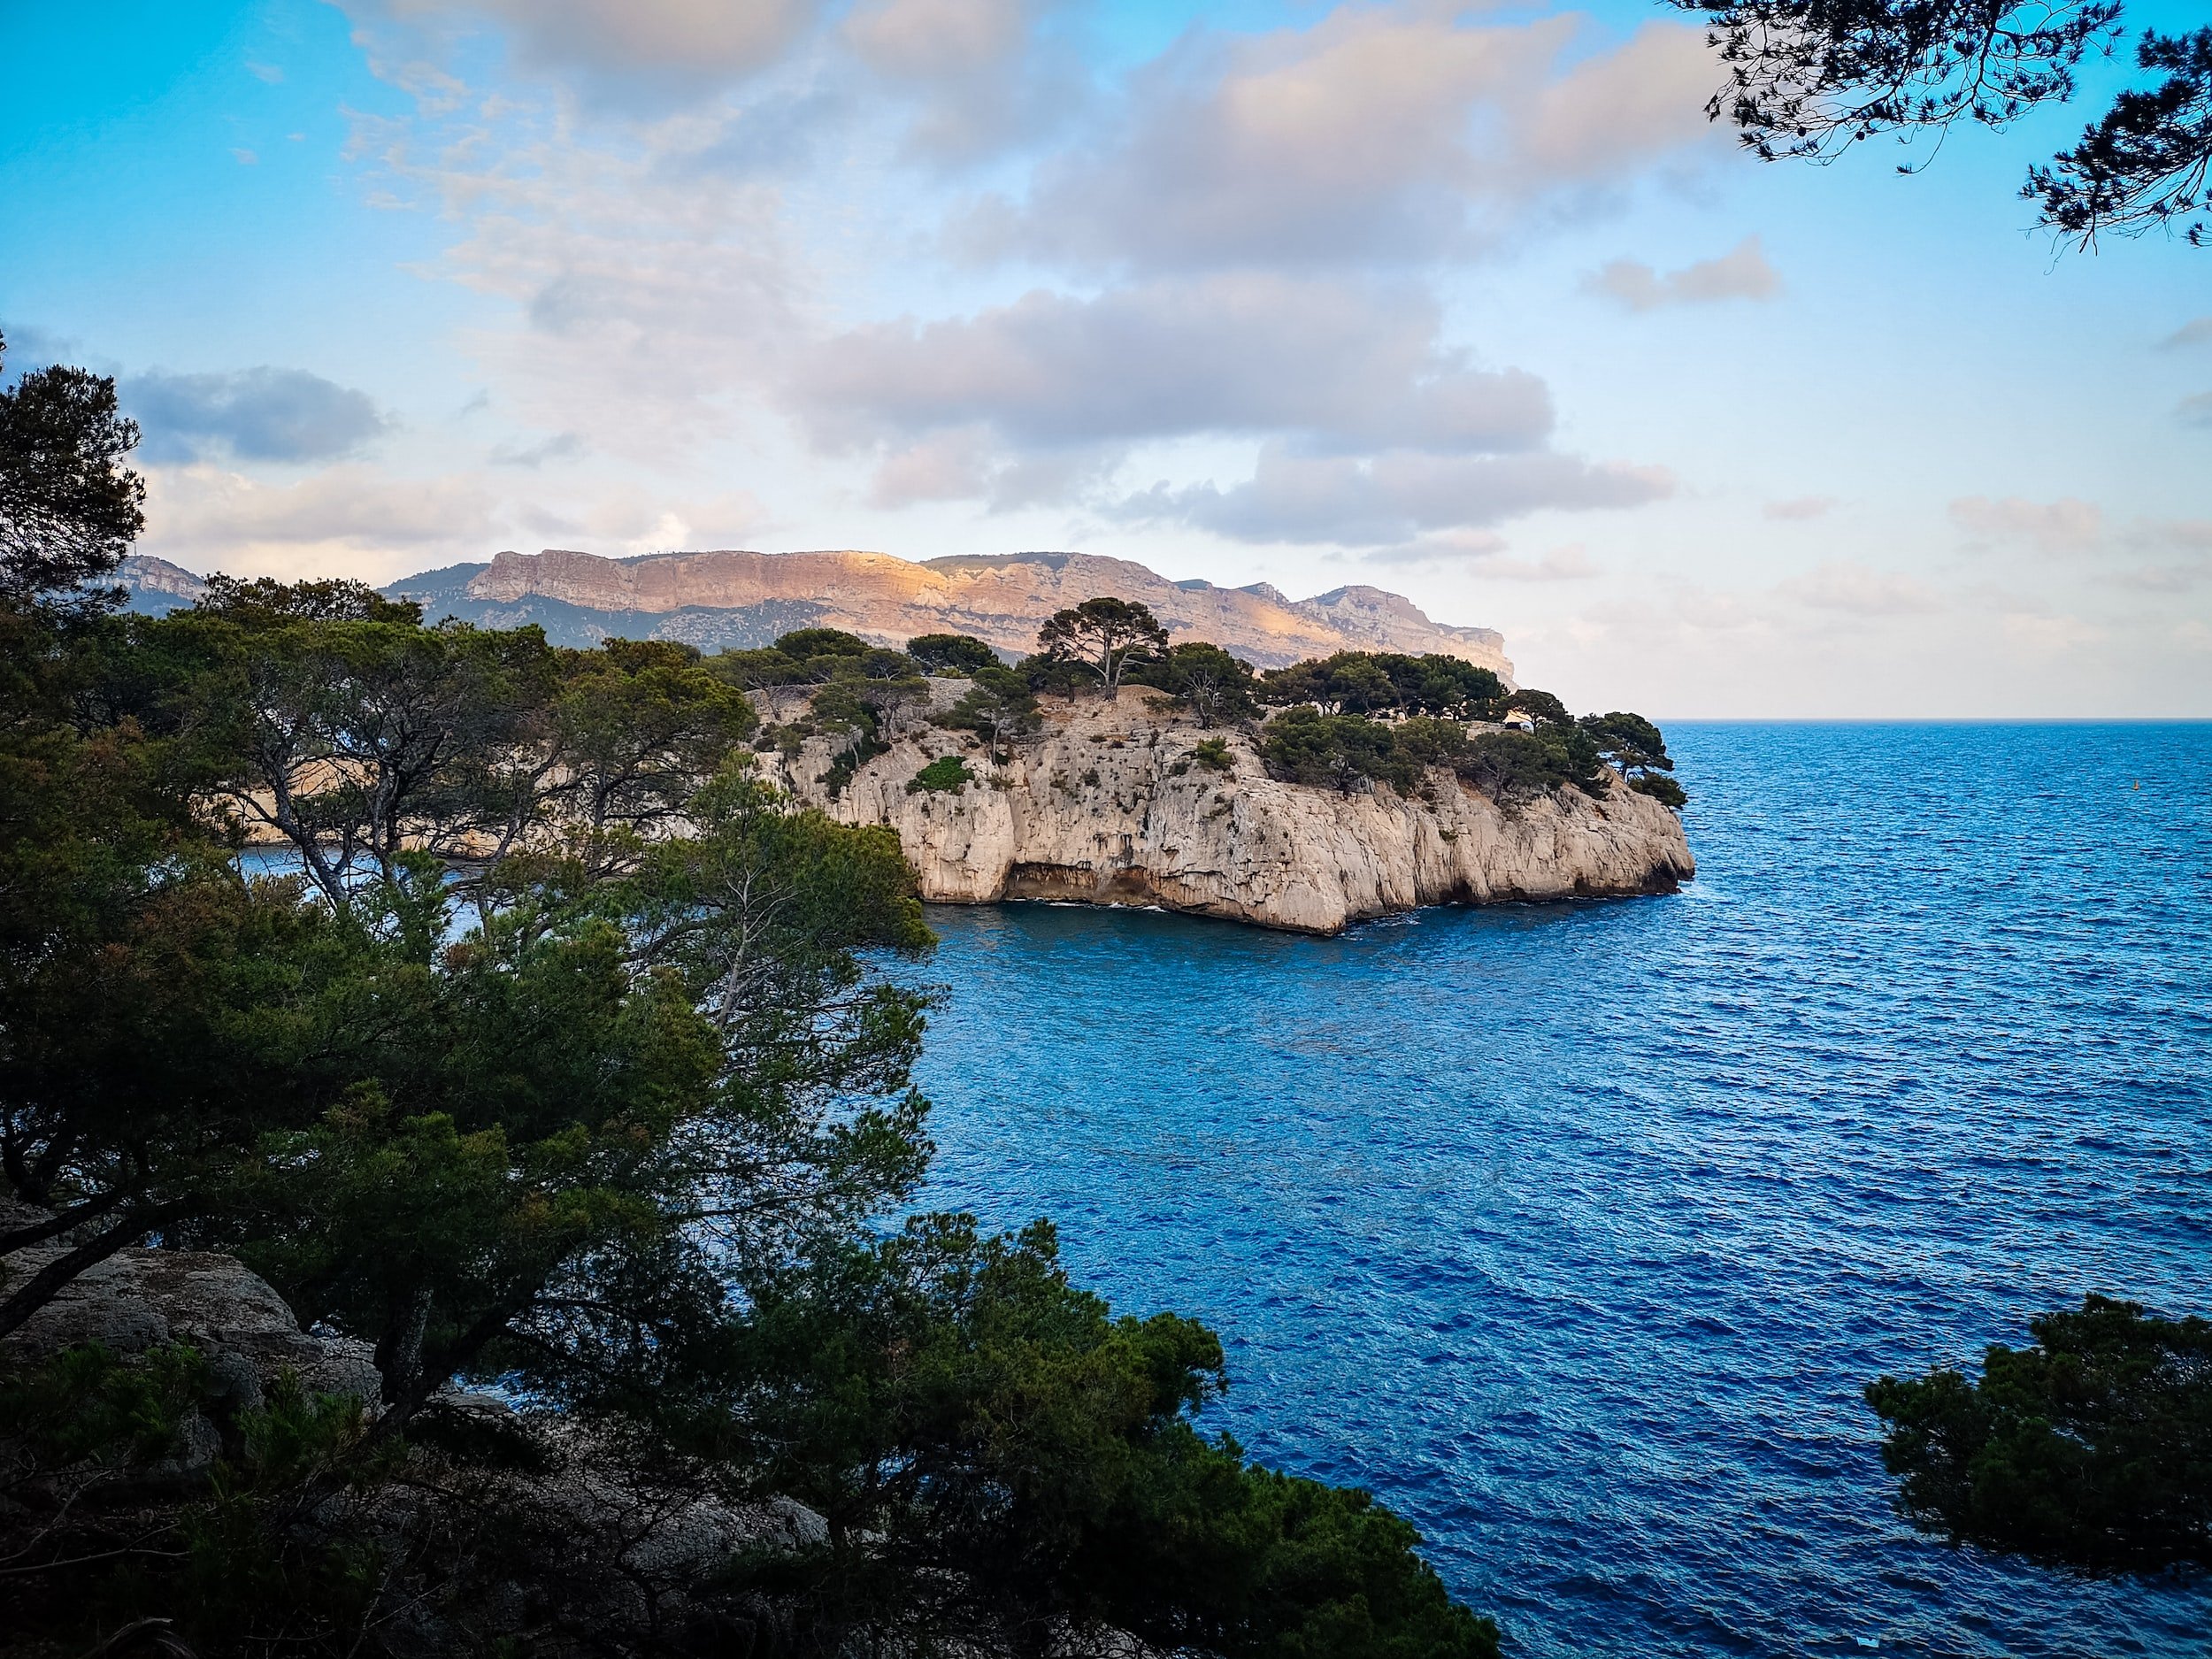 Discover the calanques of Cassis on the Côte d'Azur by boat